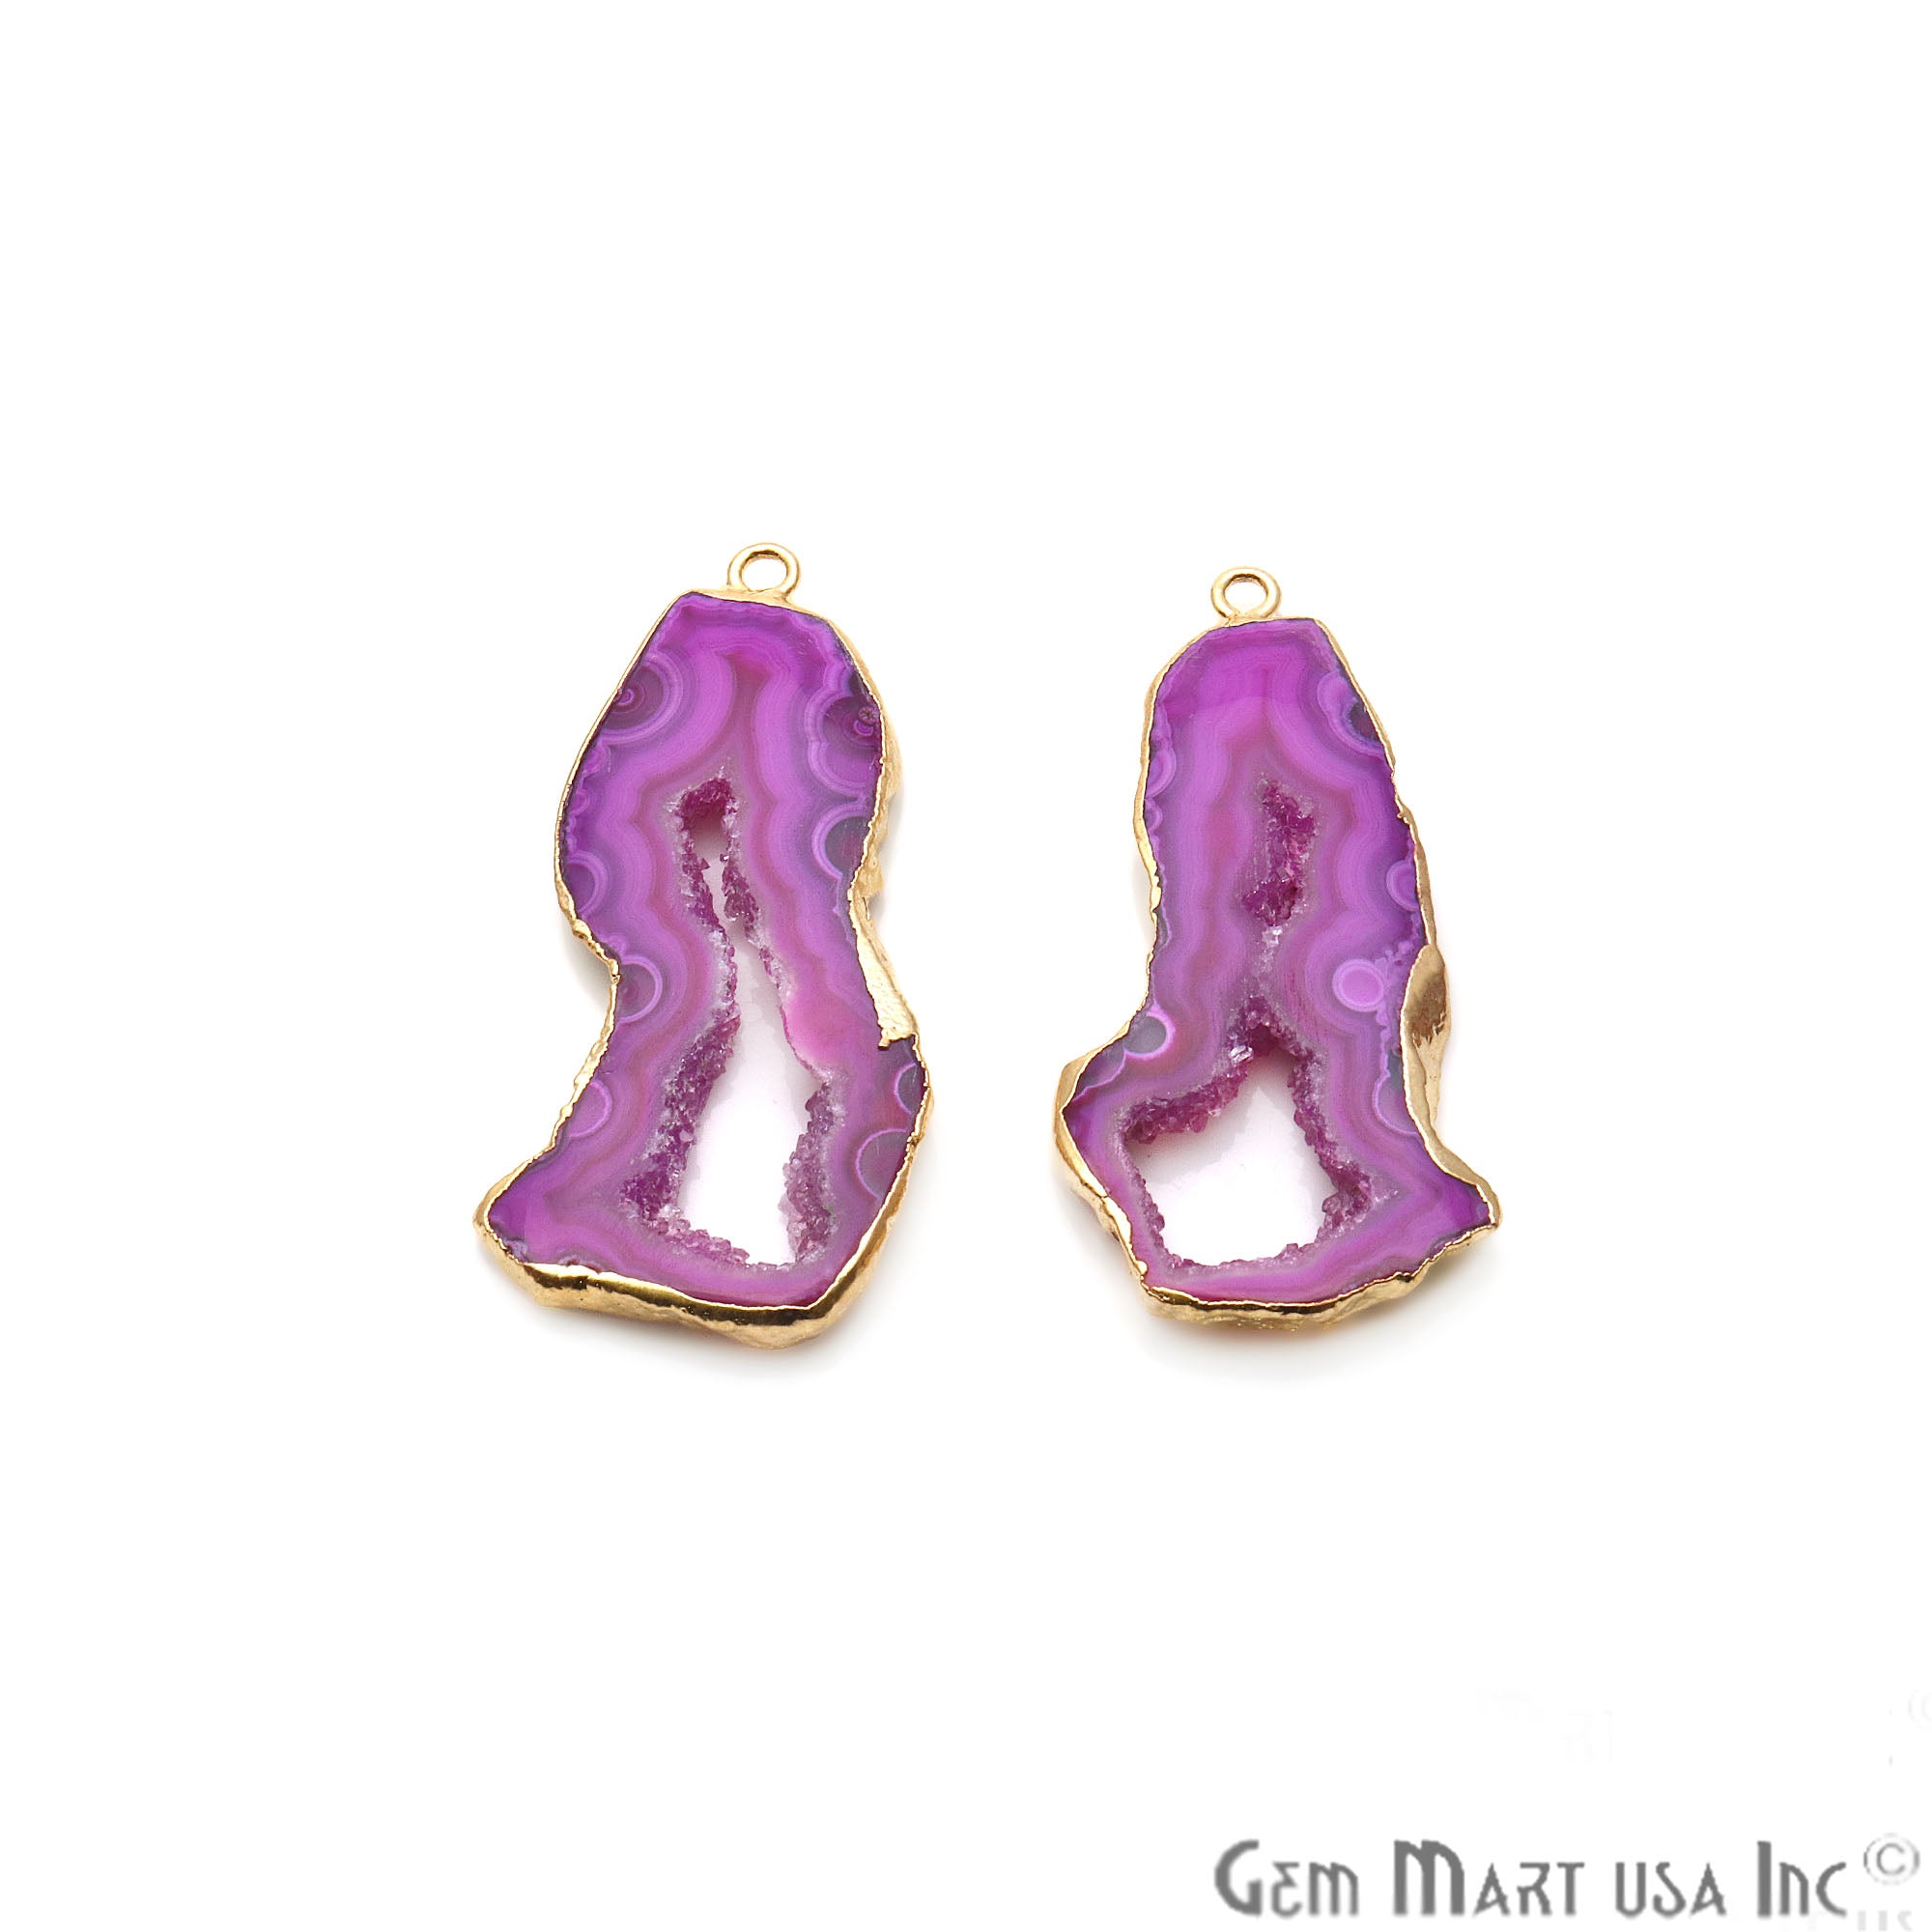 Agate Slice 22x46mm Organic Gold Electroplated Gemstone Earring Connector 1 Pair - GemMartUSA